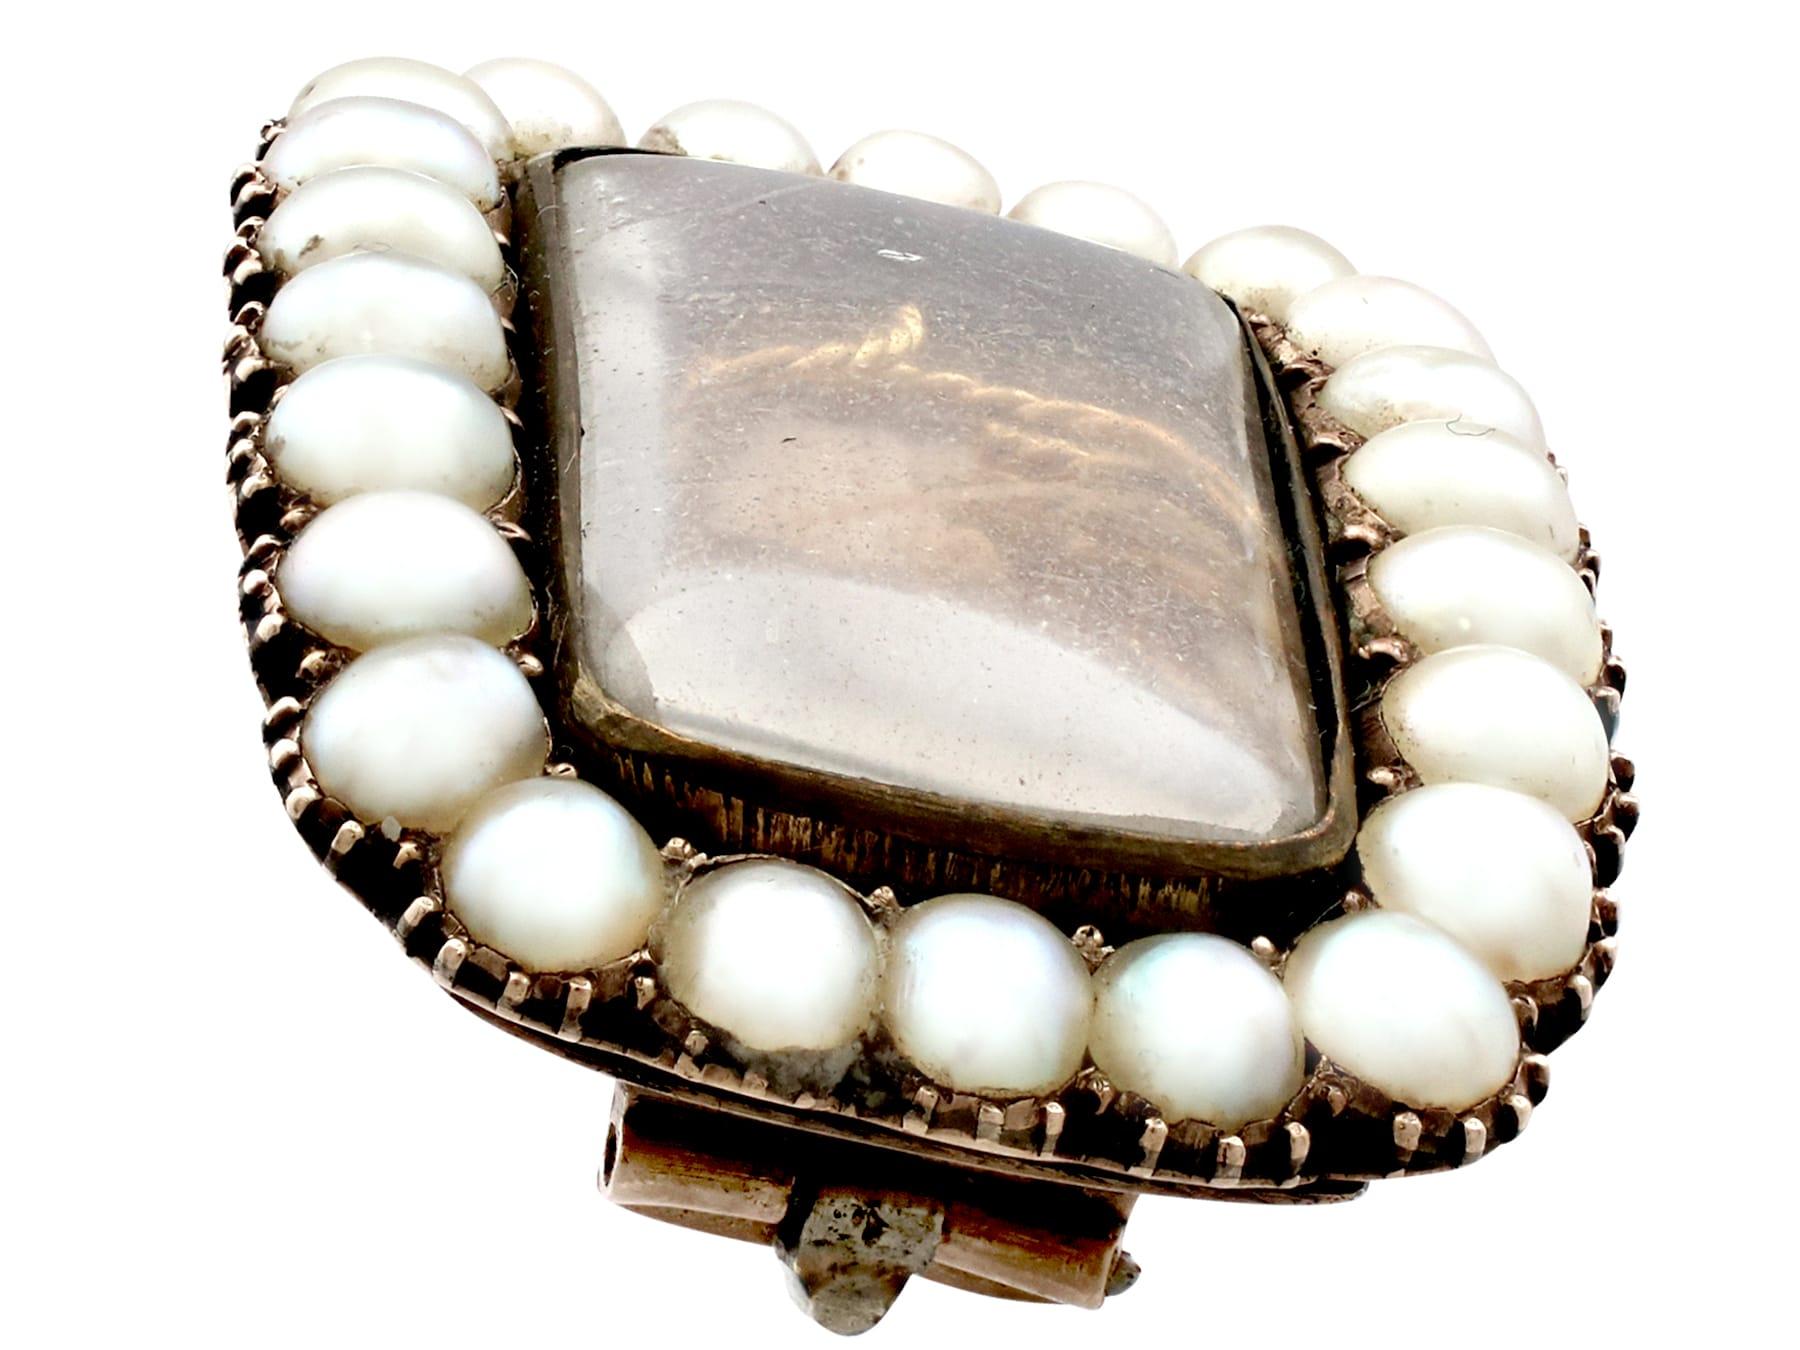 An impressive antique Victorian seed pearl and 9k yellow gold memorial brooch; part of our diverse antique jewellery and estate jewelry collections.

This fine and impressive Victorian brooch has been crafted in 9k yellow gold.

The rectangular